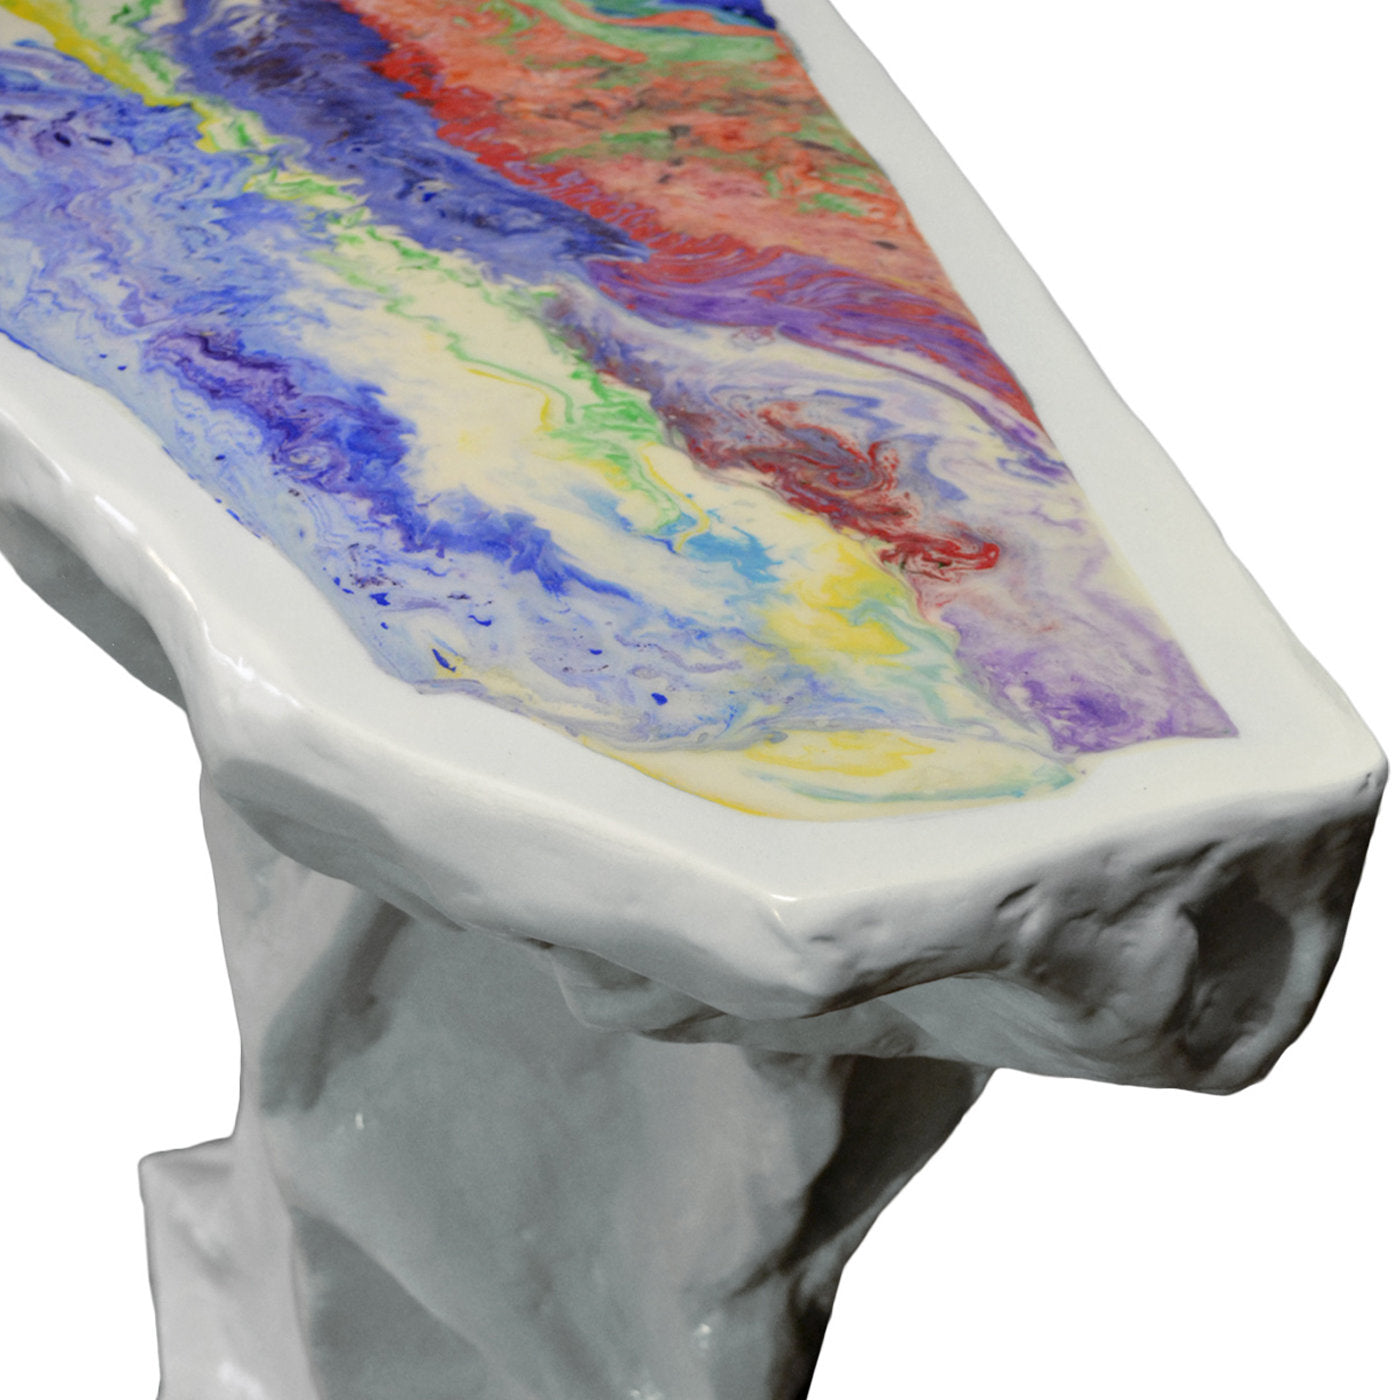 Glacial Sculpture Boreal Console Limited Edition - Alternative view 5